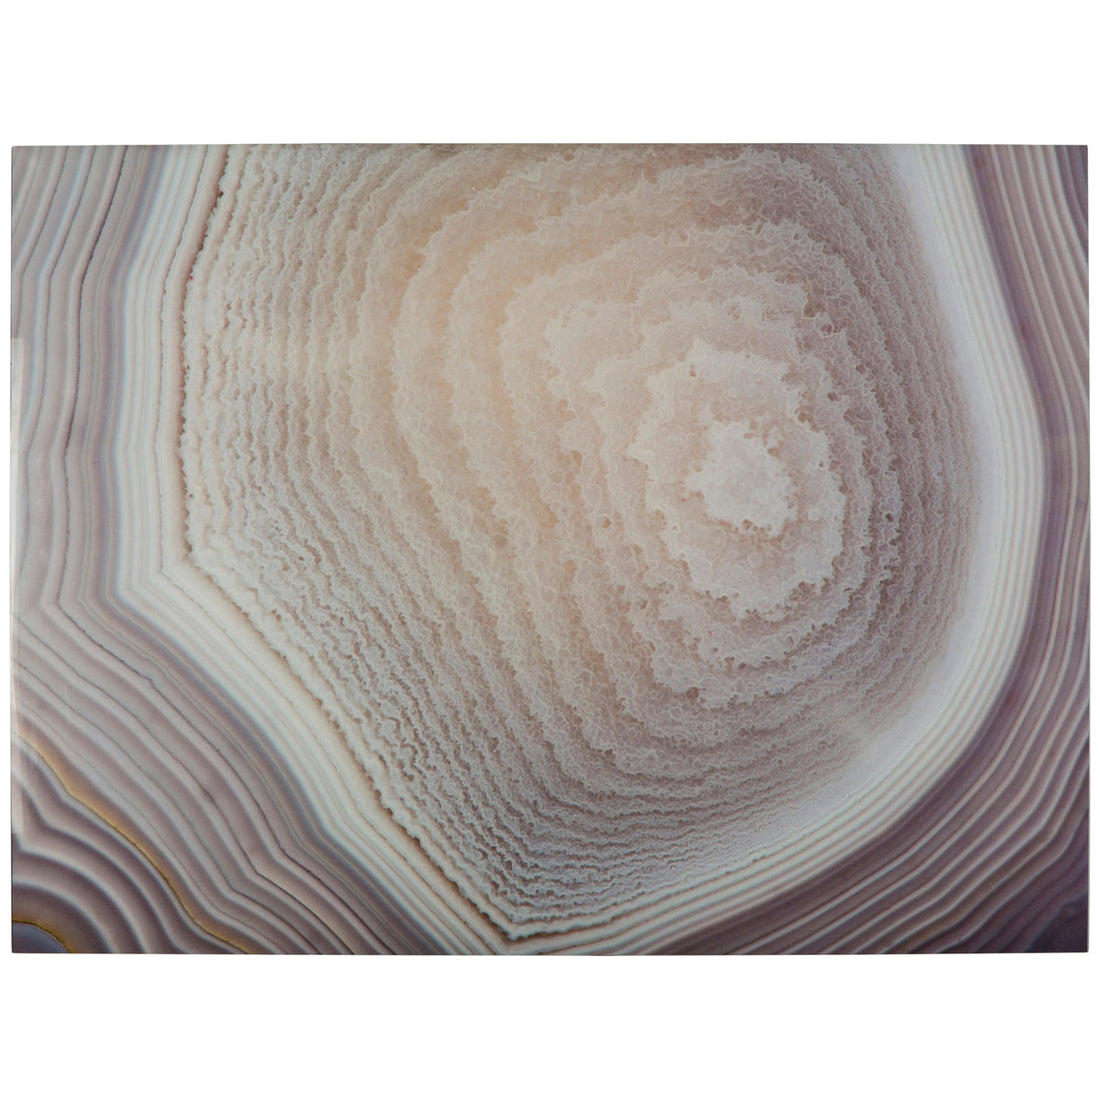 Coup & Co Neutral Agate Art Print on Glass - Style A